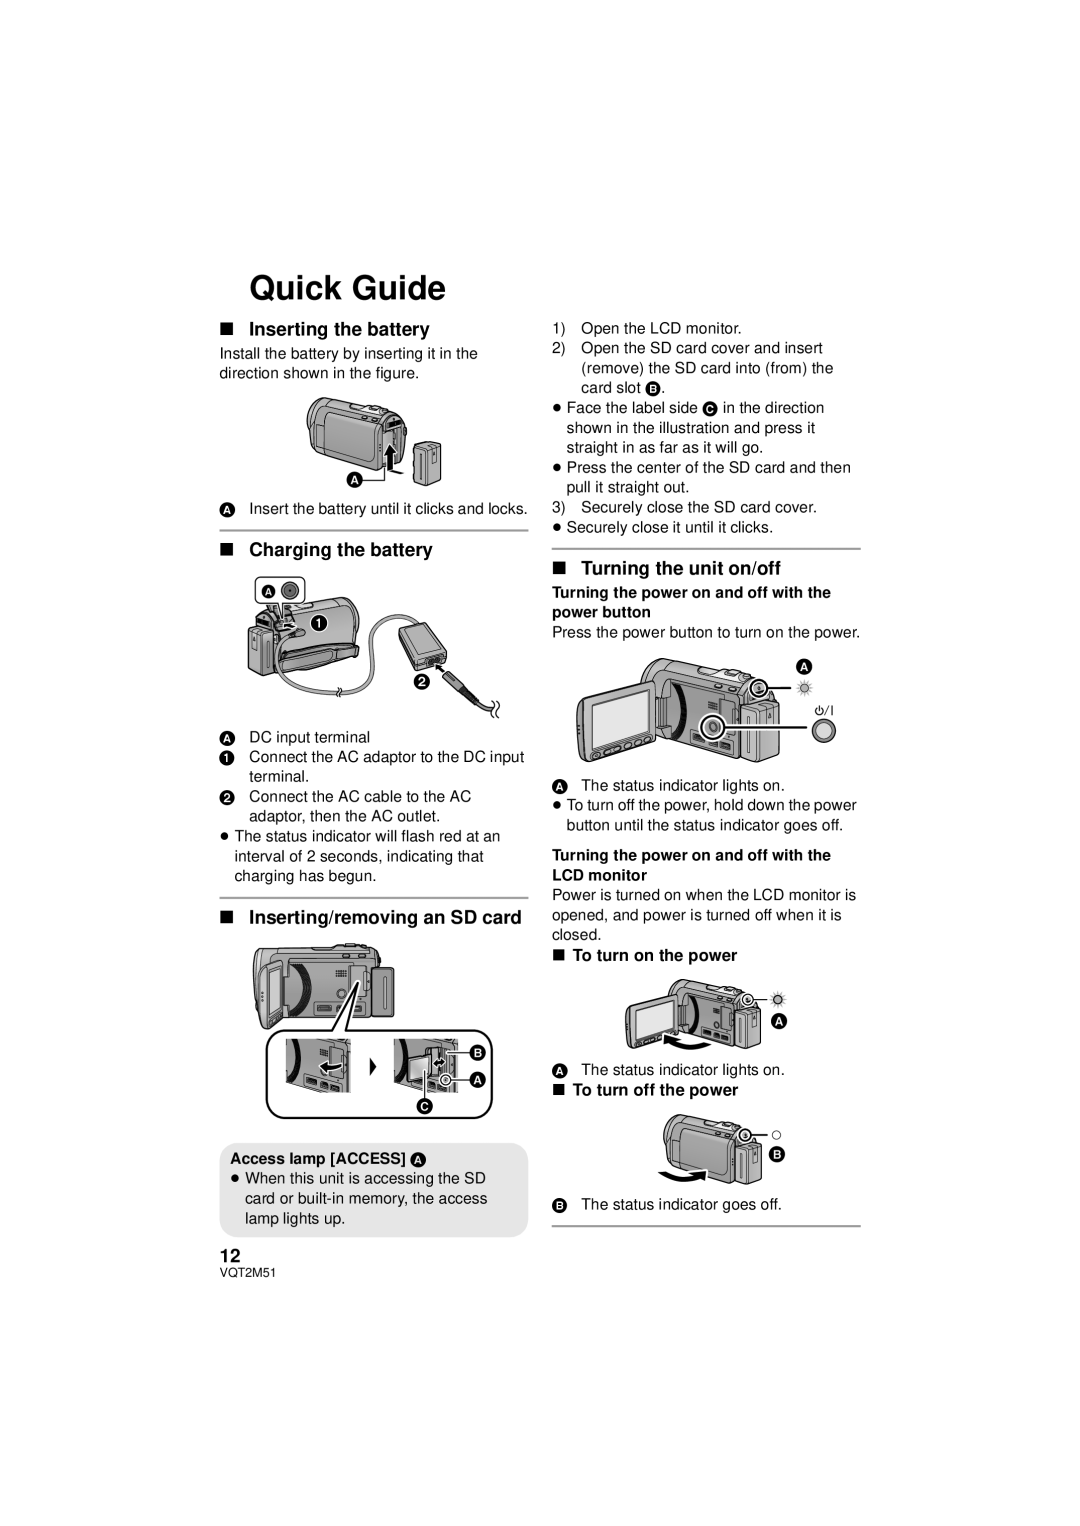 Panasonic HDC-SD60P/PC Quick Guide, ∫ Inserting the battery, ∫ Charging the battery, ∫ Inserting/removing an SD card 